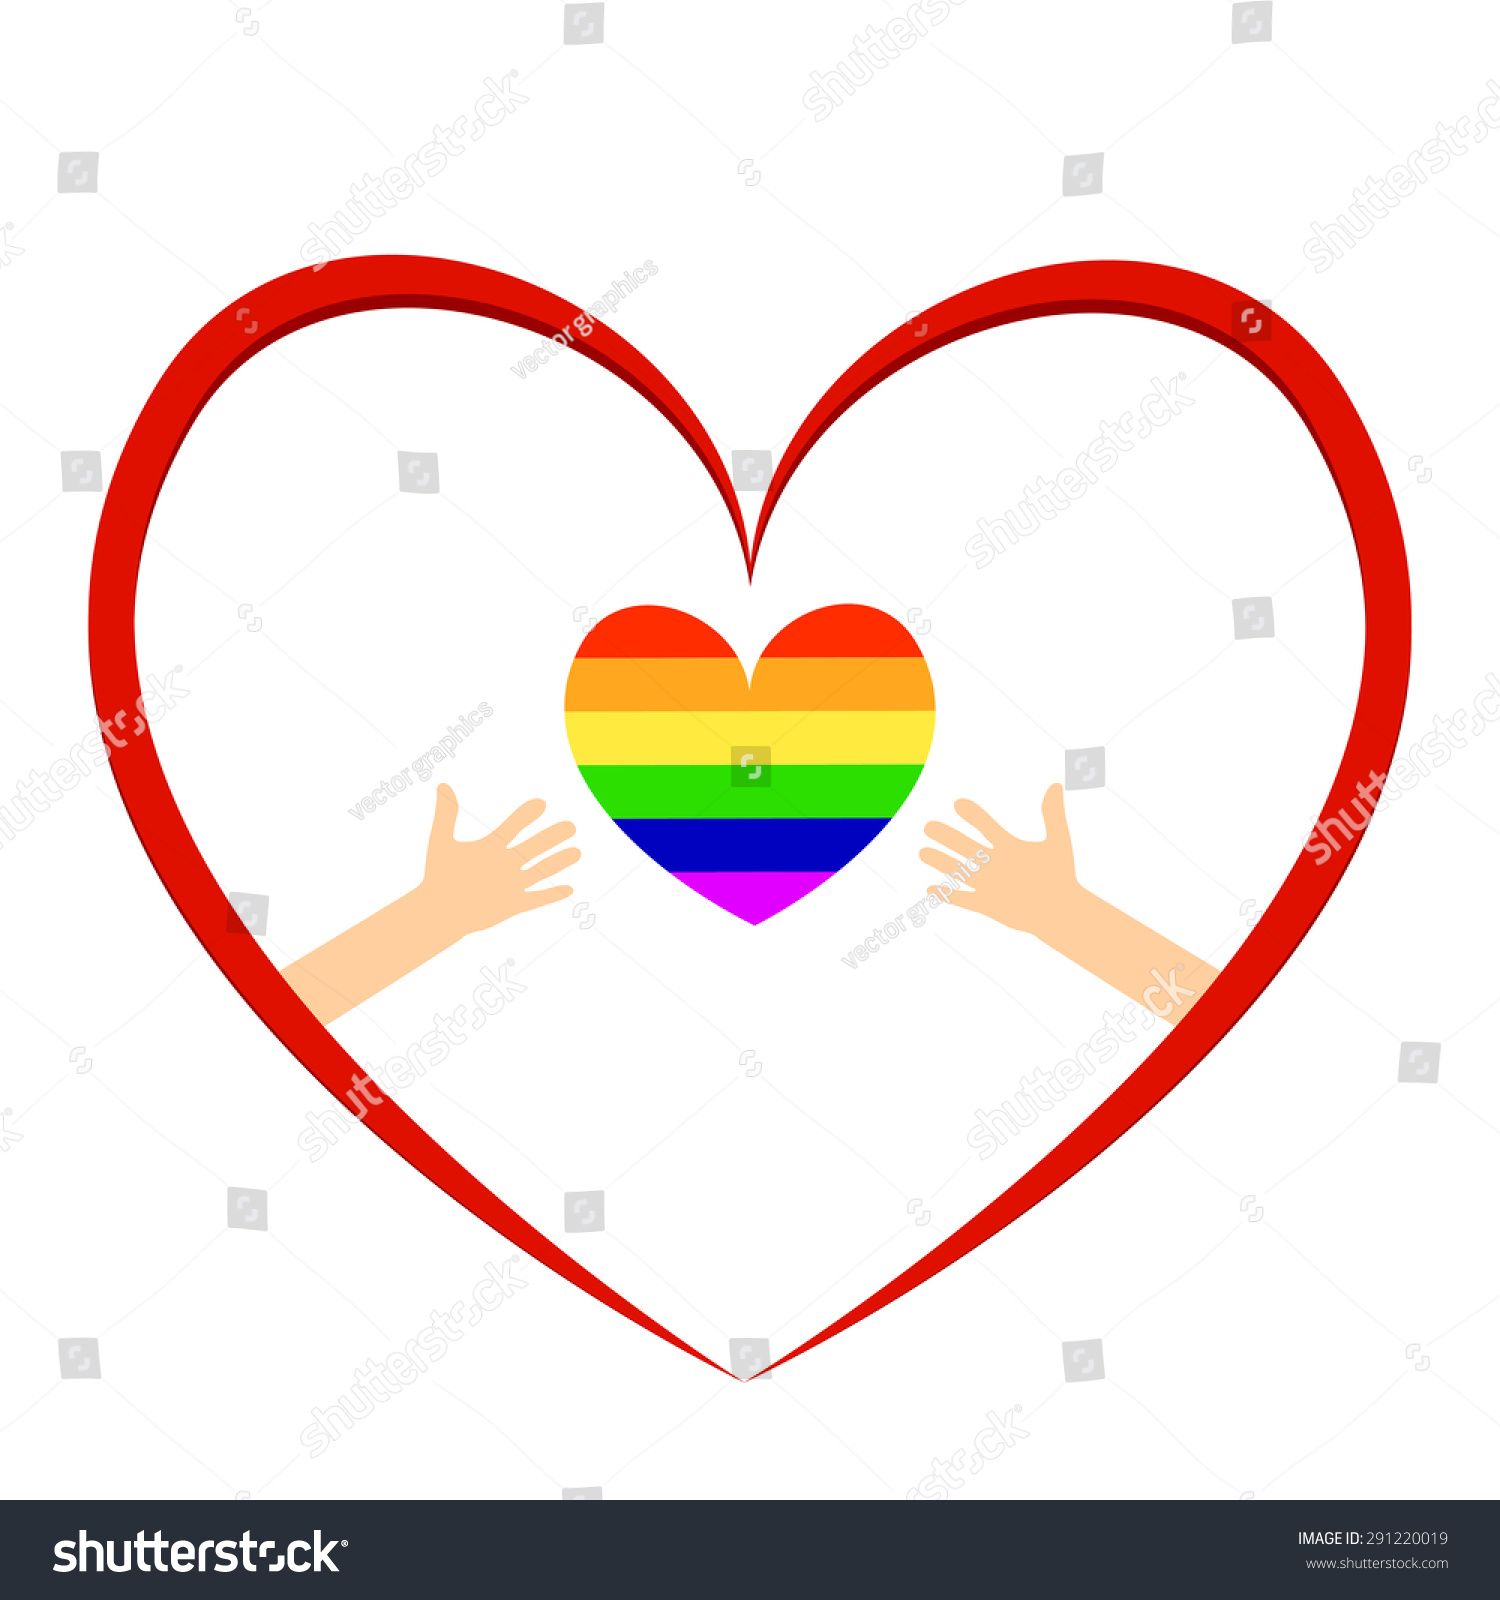 Gay Couple Gay Love Icons Set Royalty Free Stock Vector 291220019 8640